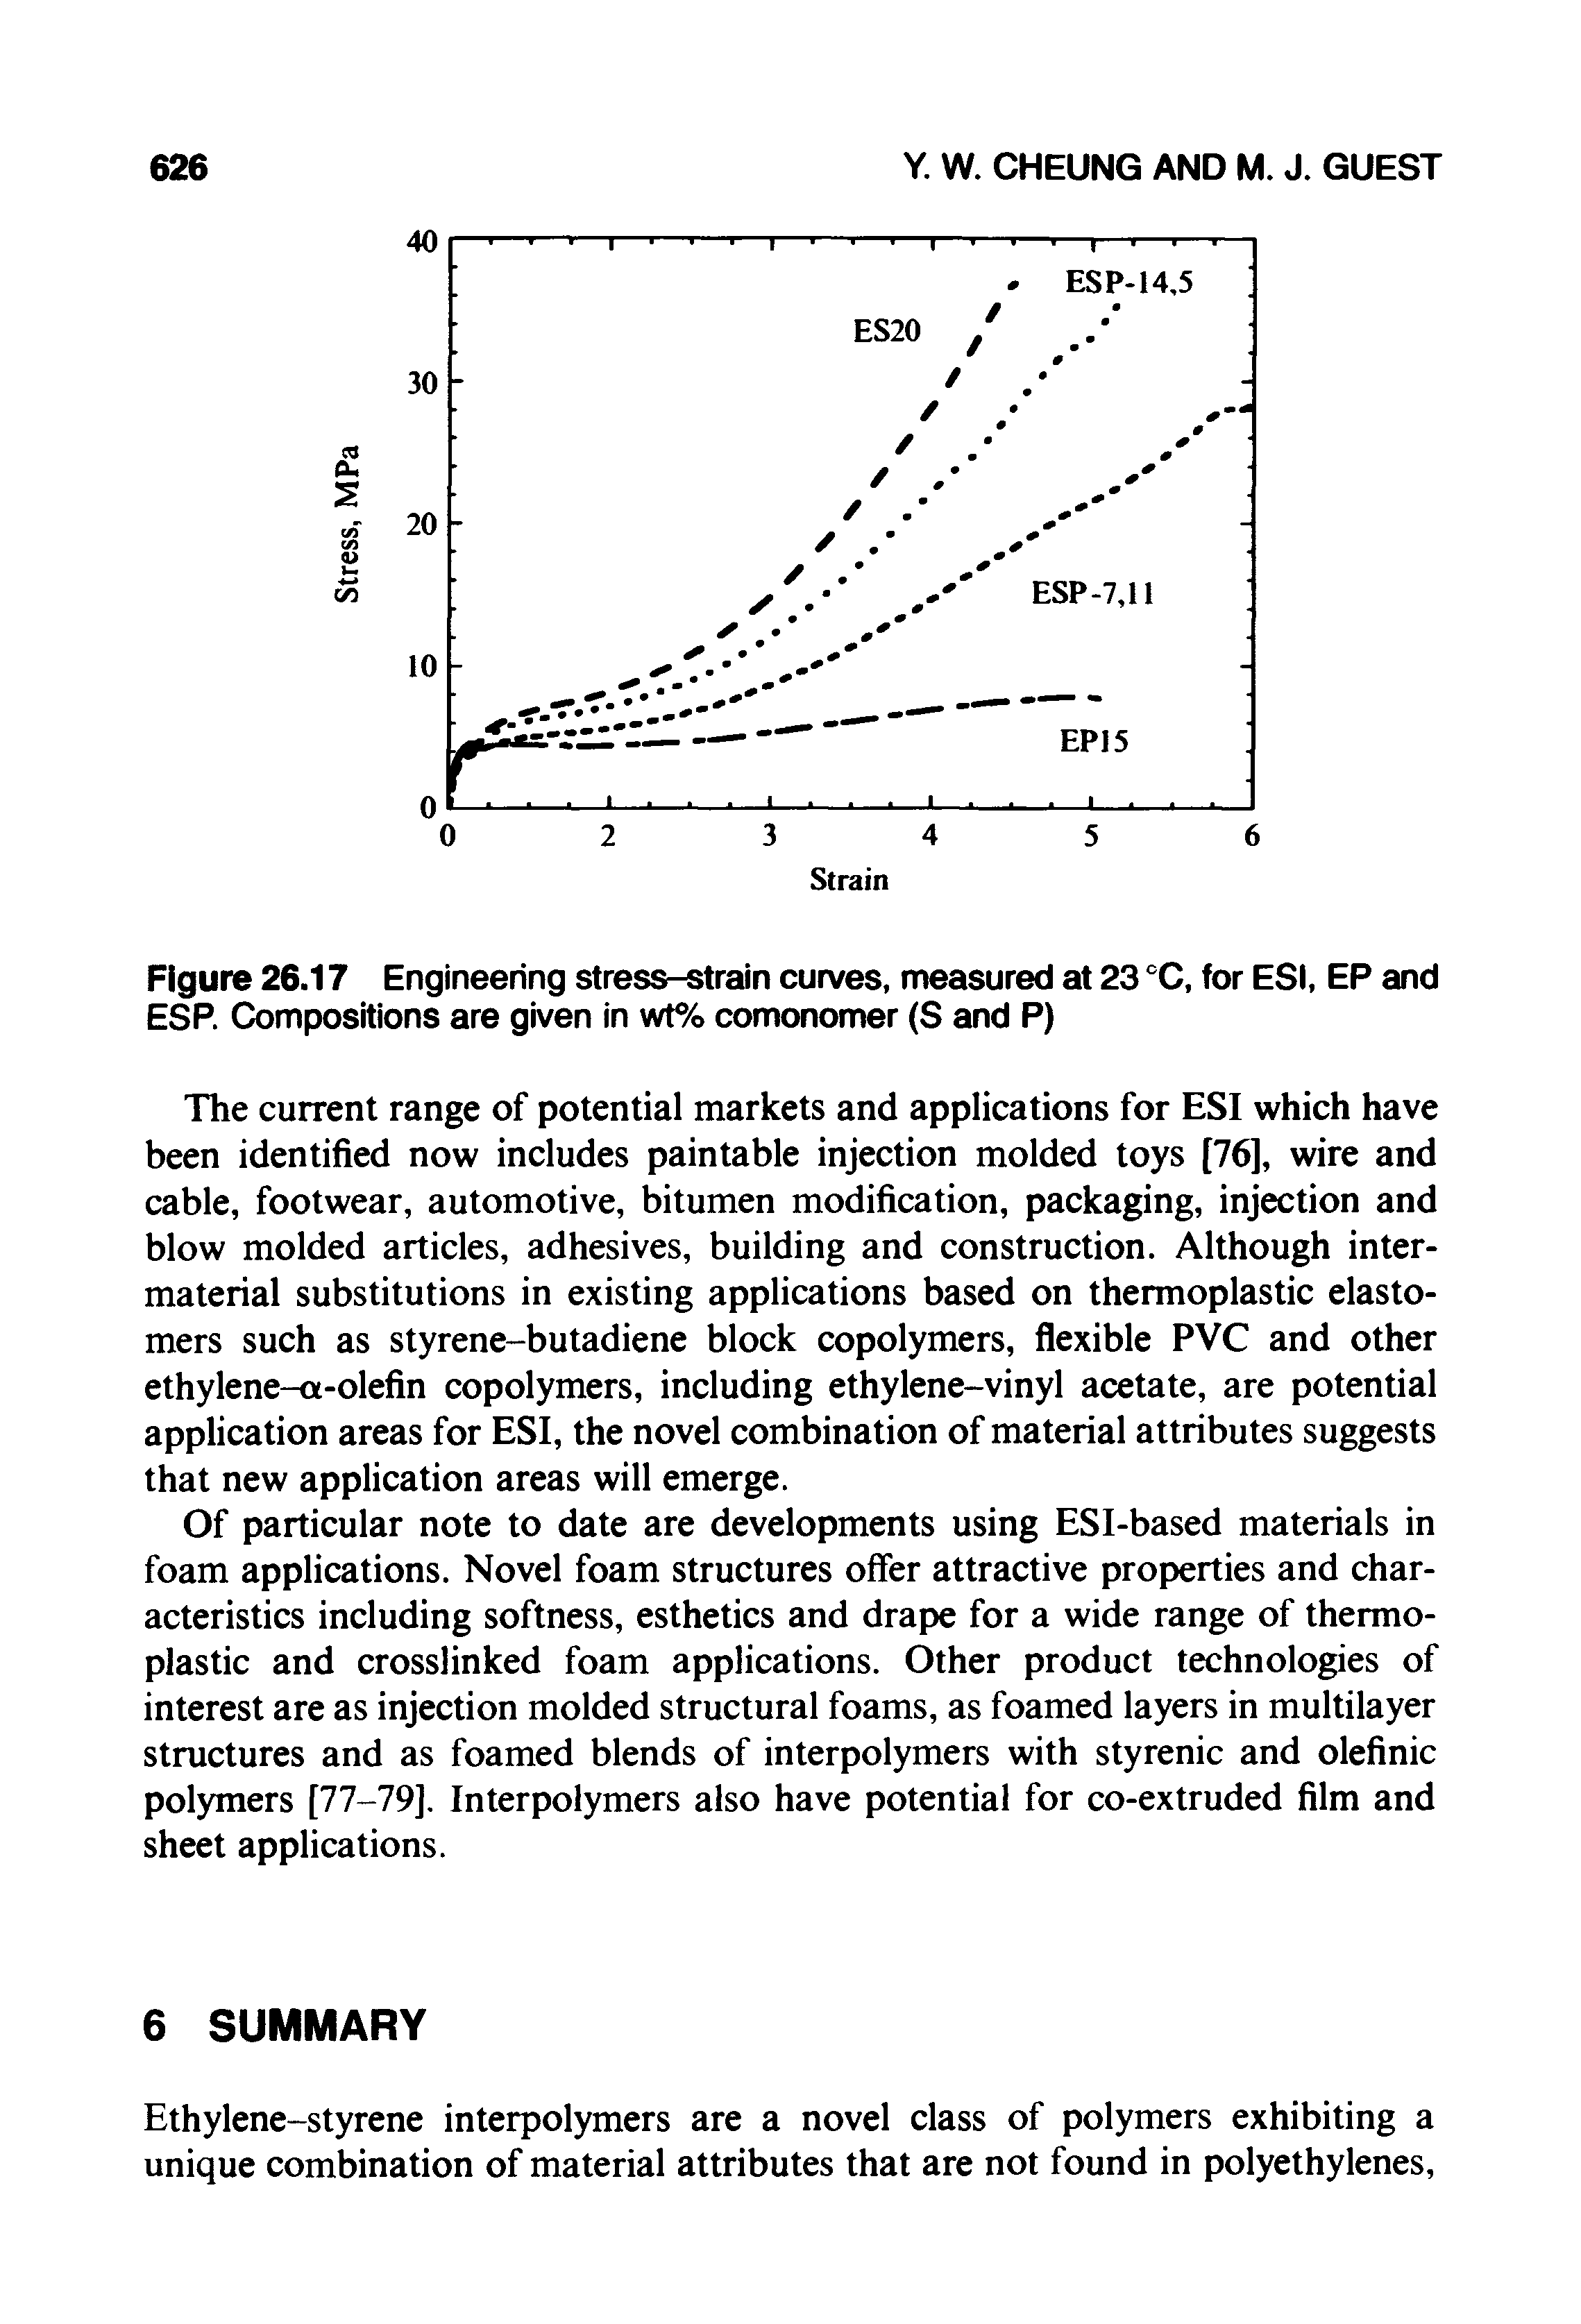 Figure 26.17 Engineering stress-strain curves, measured at 23 cC, for ESI, EP and ESP. Compositions are given in wt% comonomer (S and P)...